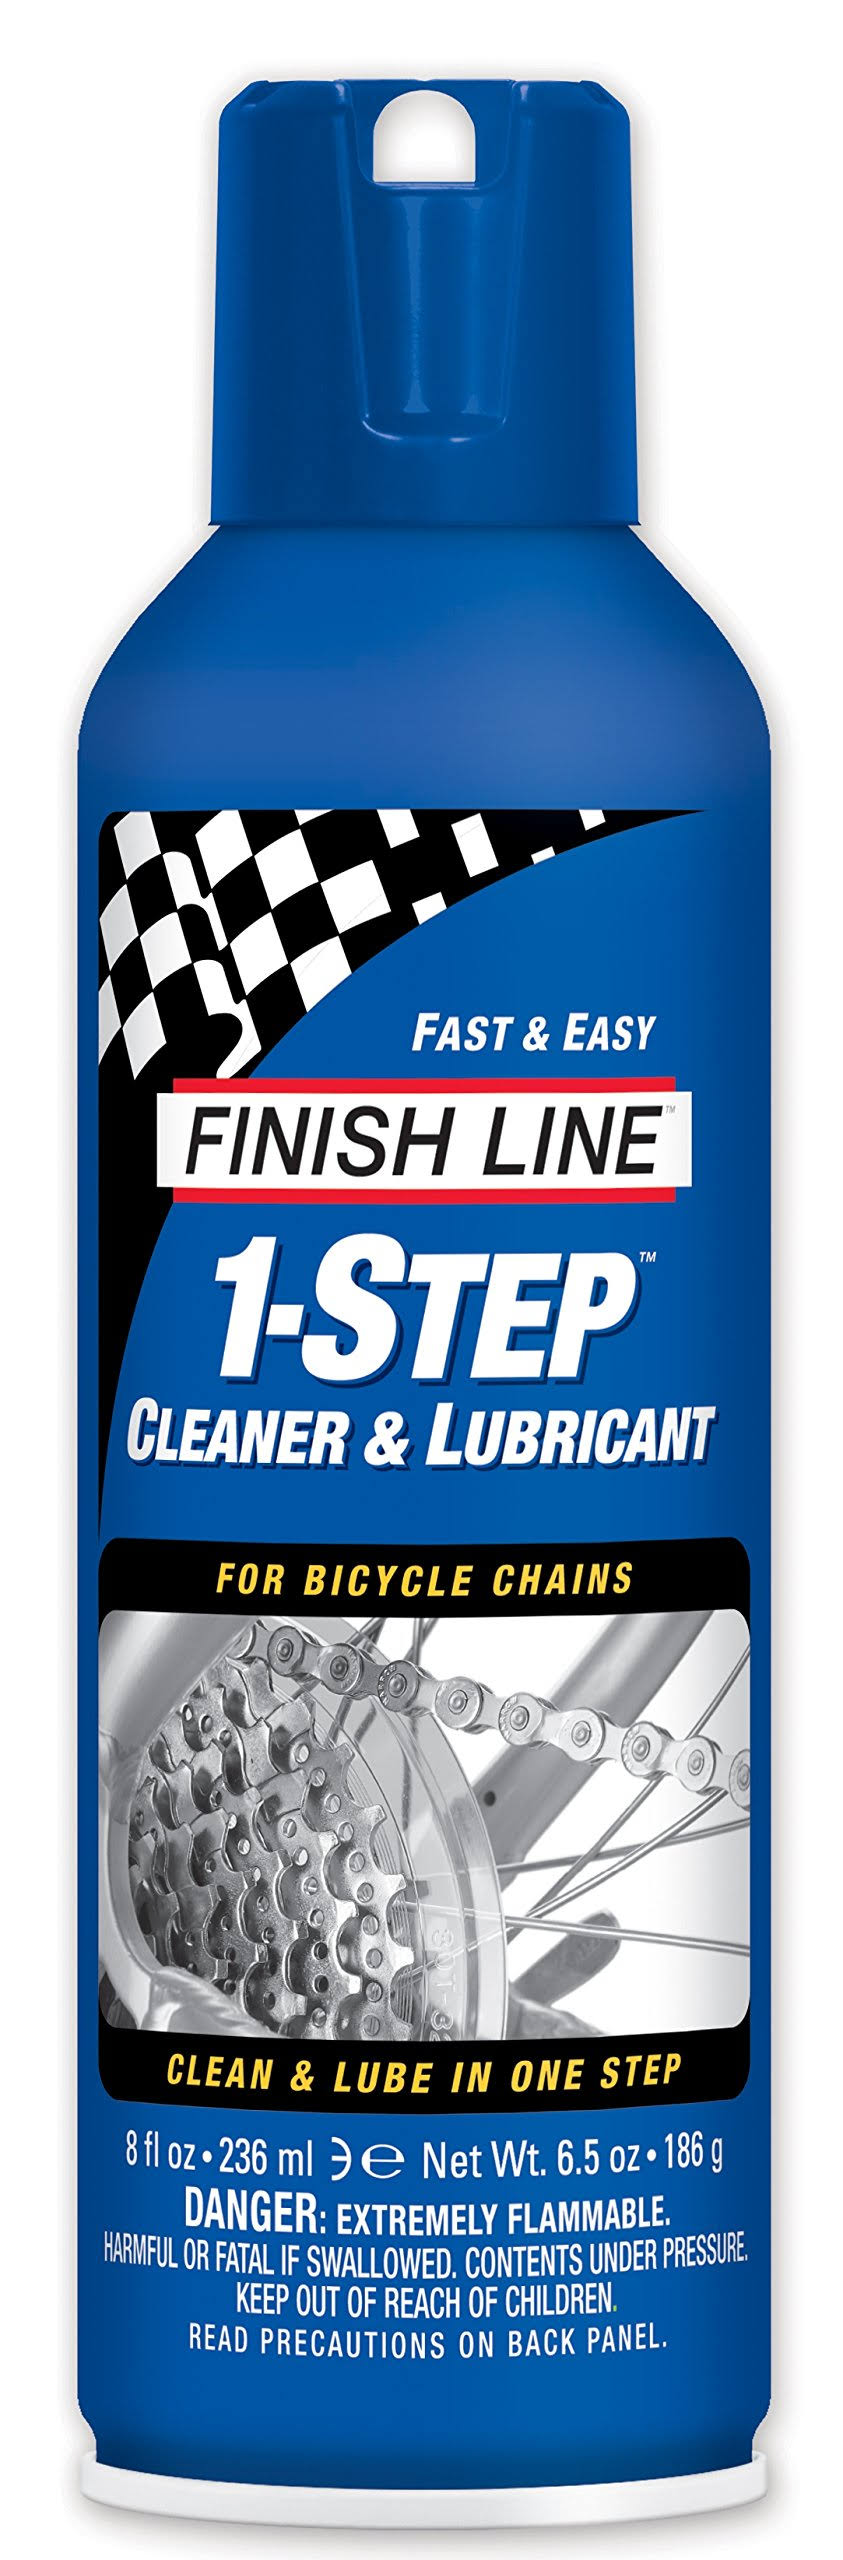 Finish Line 1-Step Bicycle Chain Cleaner & Lubricant